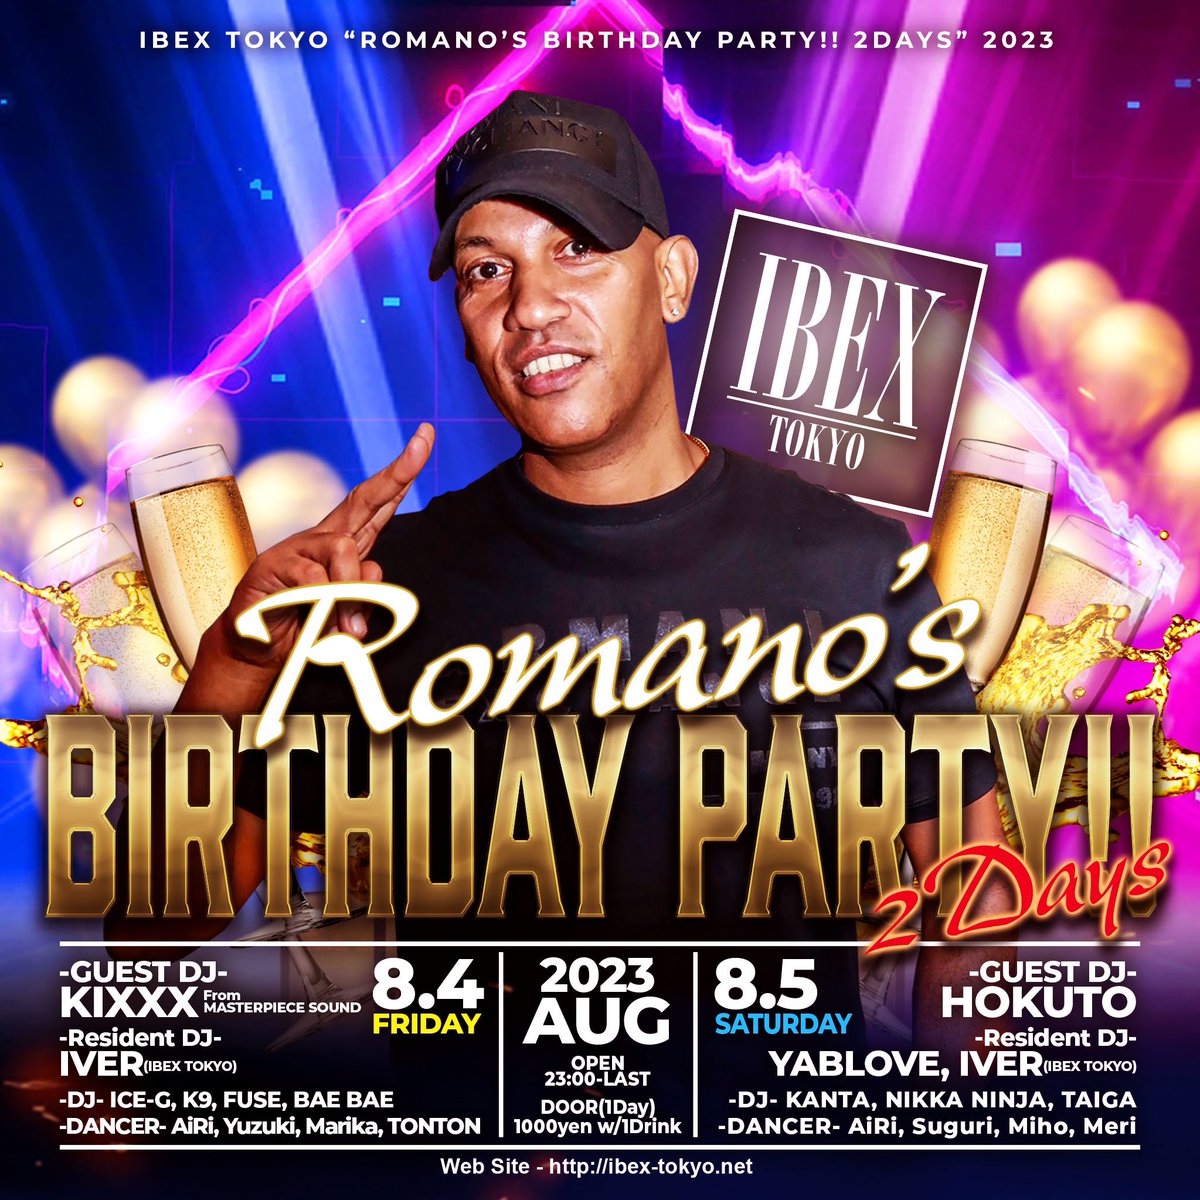 We are going to have a wonderful 2 Dayz Birthday party for our Boss 'ROMANO' at Ibex Tokyo on August 4th Friday and August 5th Saturday. You are all cordially invited to be with us. Team Ibex Tokyo!!! #六本木 #ナイトクラブ #ヒップホップ #アフロビート #ダンスホール #dope